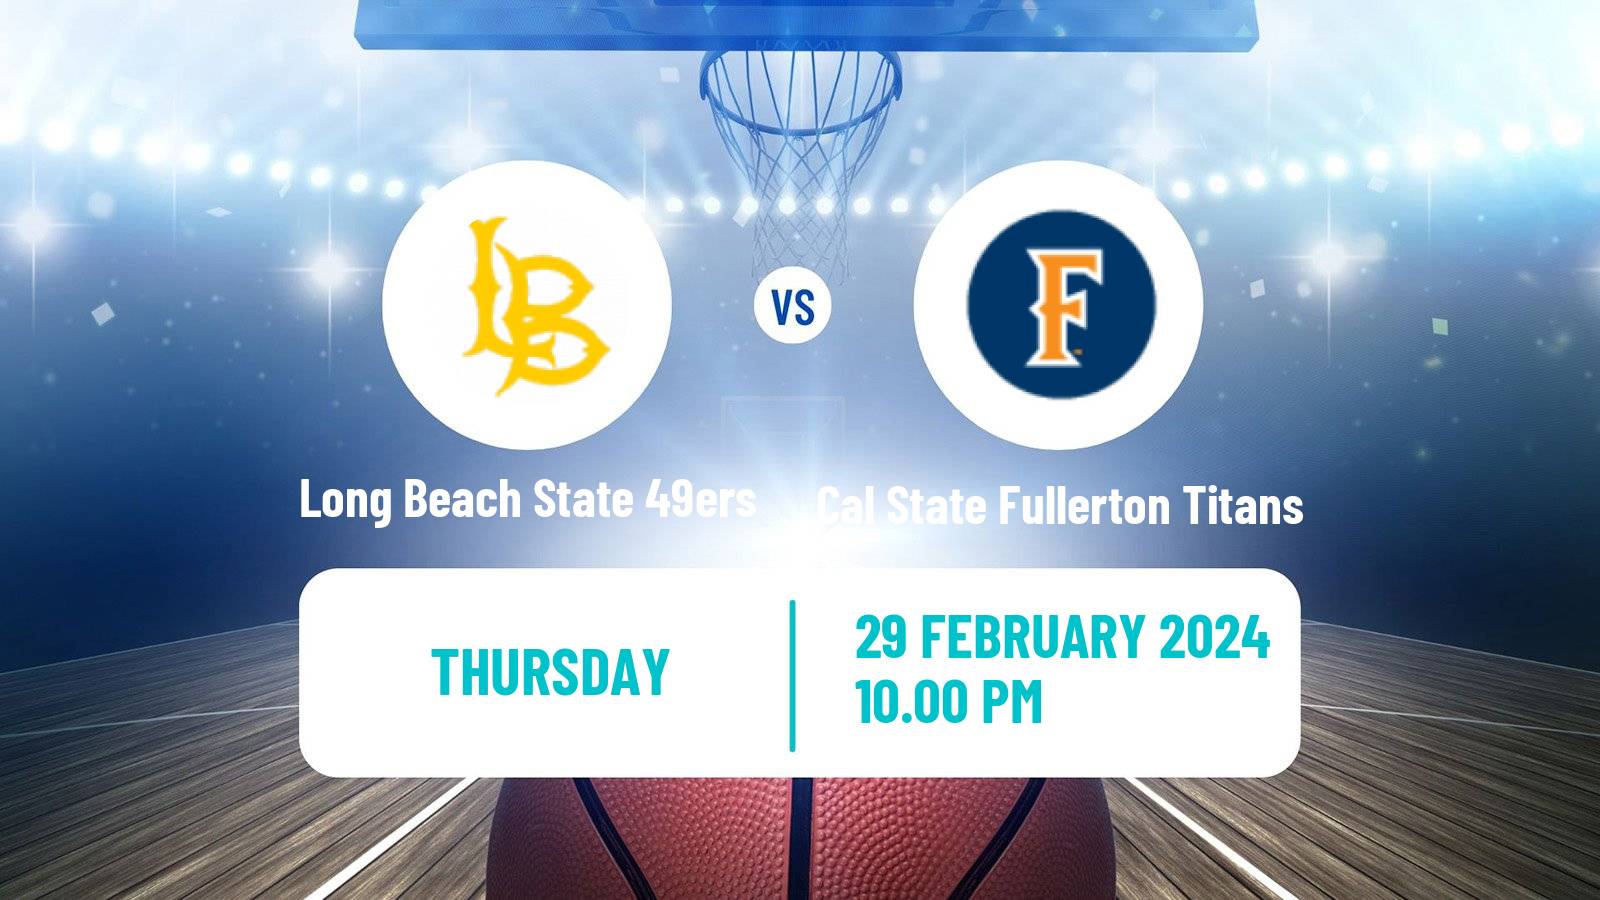 Basketball NCAA College Basketball Long Beach State 49ers - Cal State Fullerton Titans